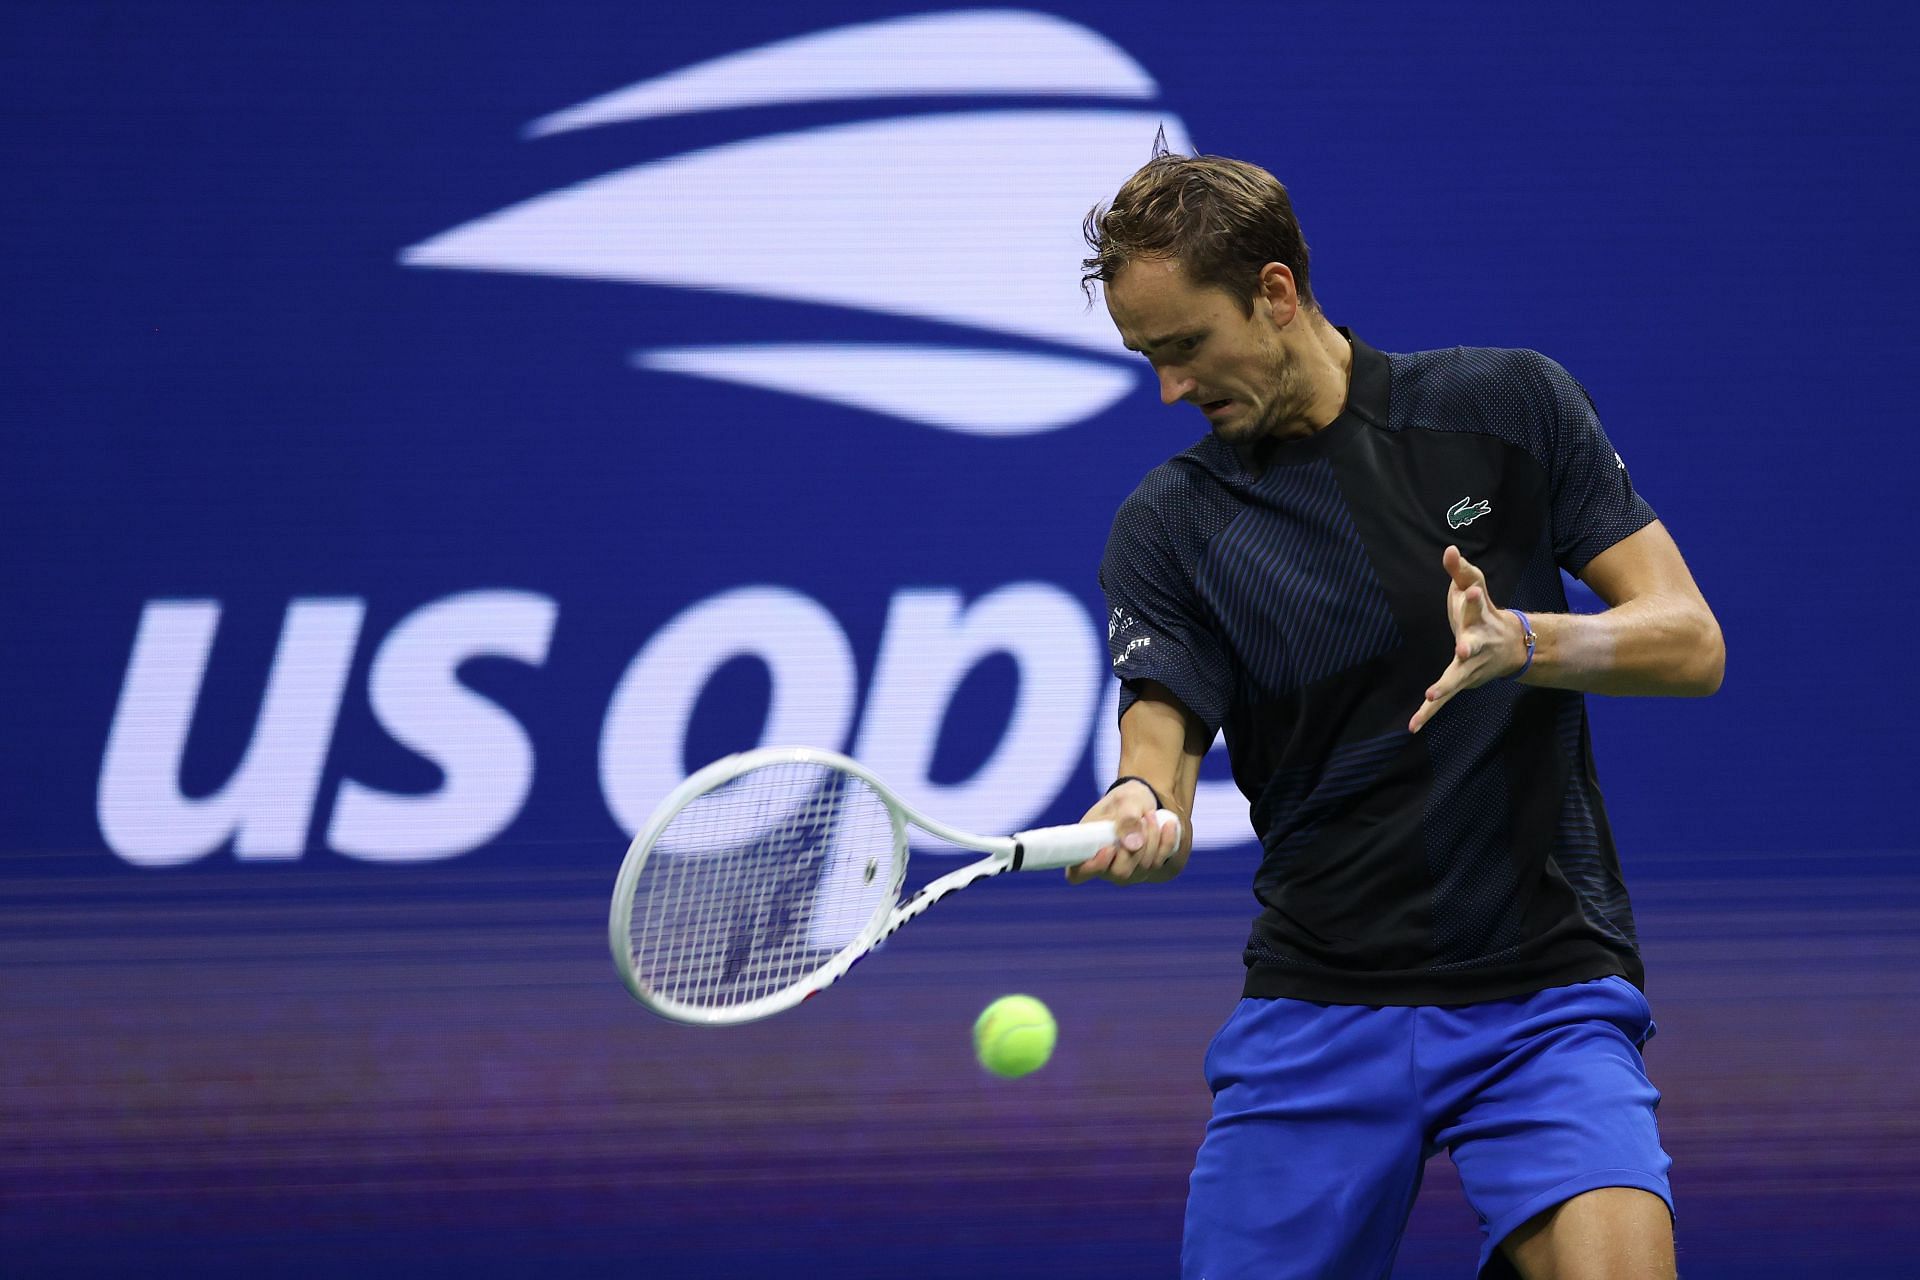 Daniil Medvedev will look to make the semifinals of the Astana Open